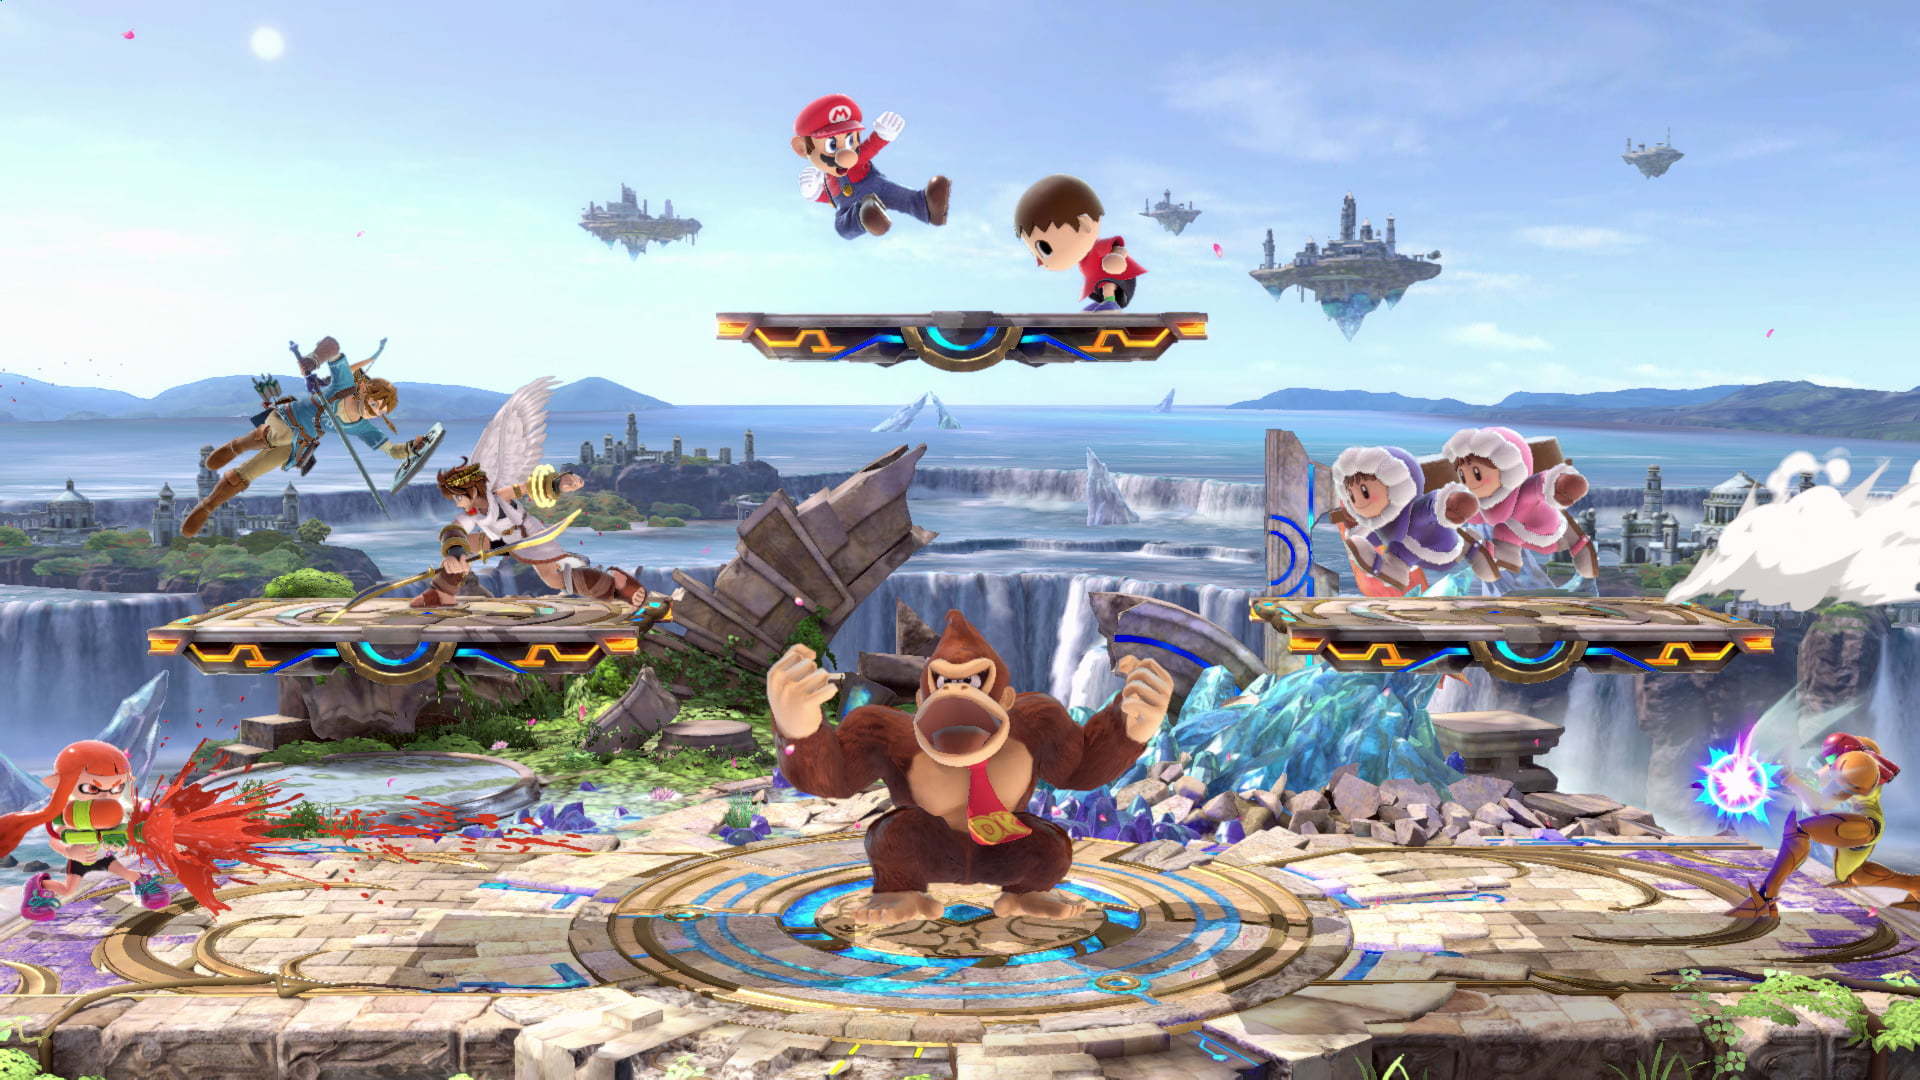 Super Smash Bros. Ultimate' is a new must-have for Switch users